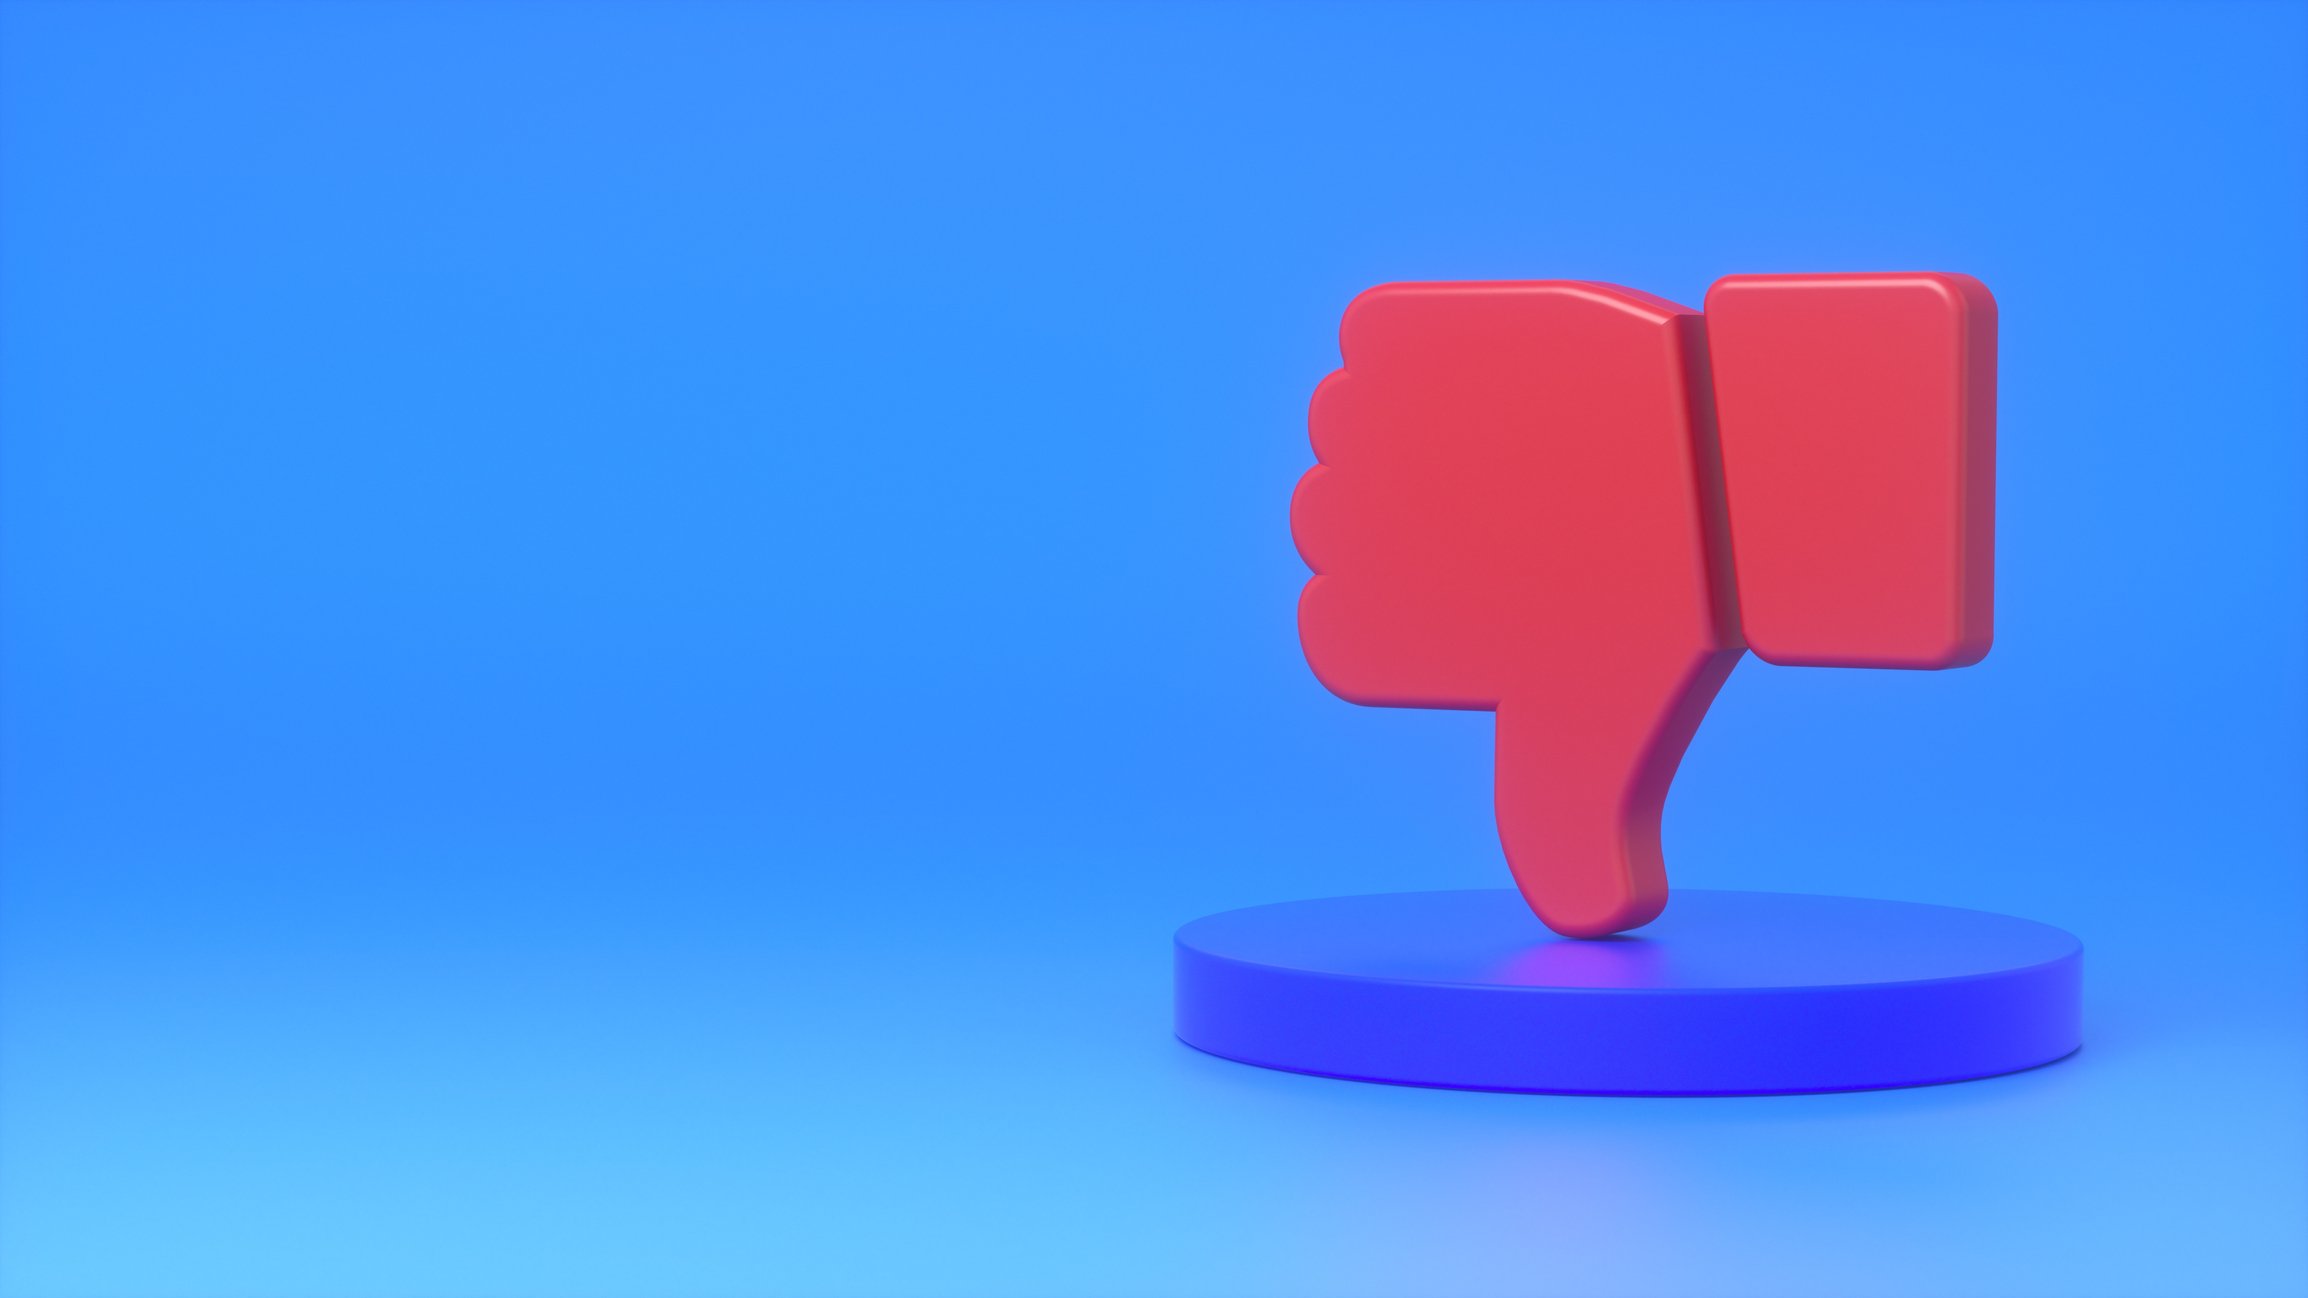 Graphic image of a red thumbs down against a blue background